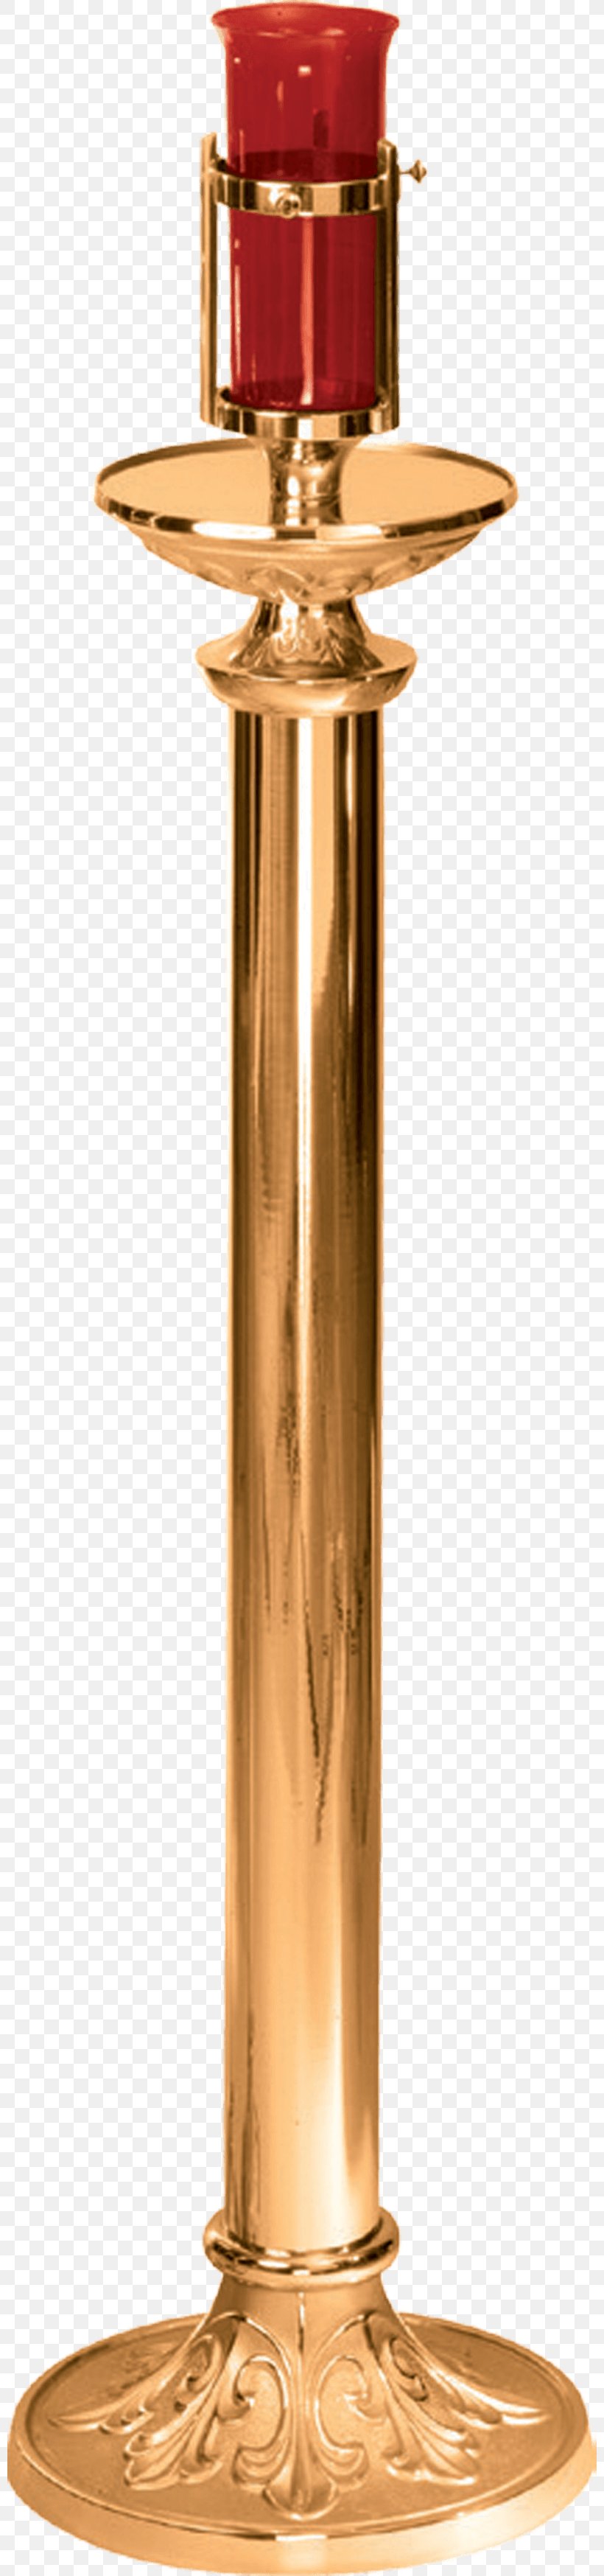 Brass 01504 Copper, PNG, 800x3495px, Brass, Copper, Metal Download Free